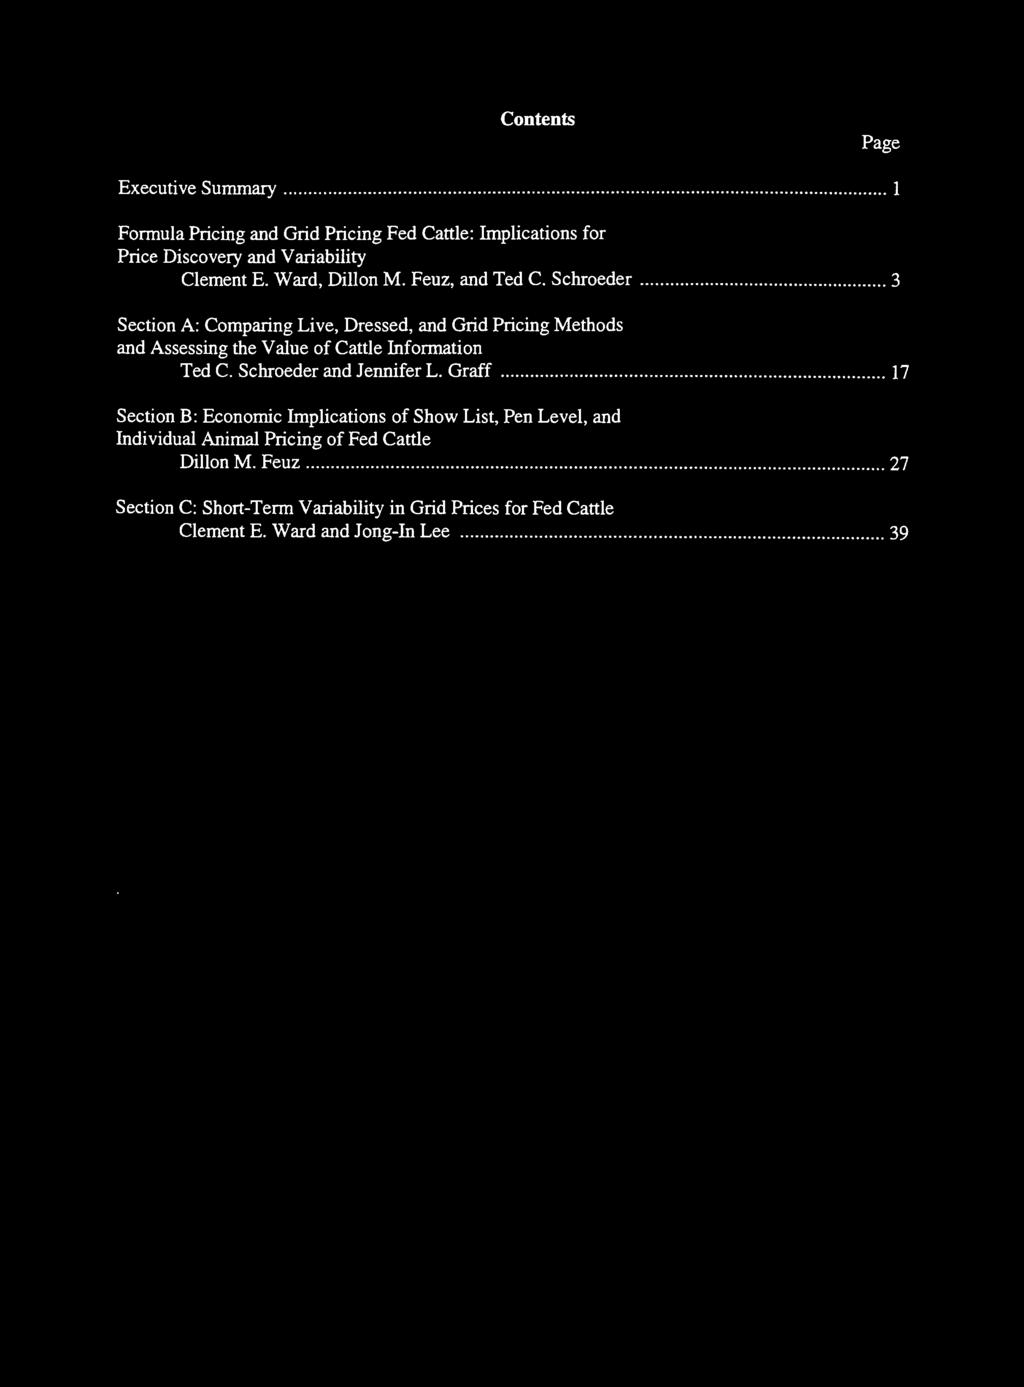 Contents Page Executive Summary... 1 Formula Pricing and Grid Pricing Fed Cattle: Implications for Price Discovery and Variability Clement E. Ward, Dillon M. Feuz, and Ted C. Schroeder.